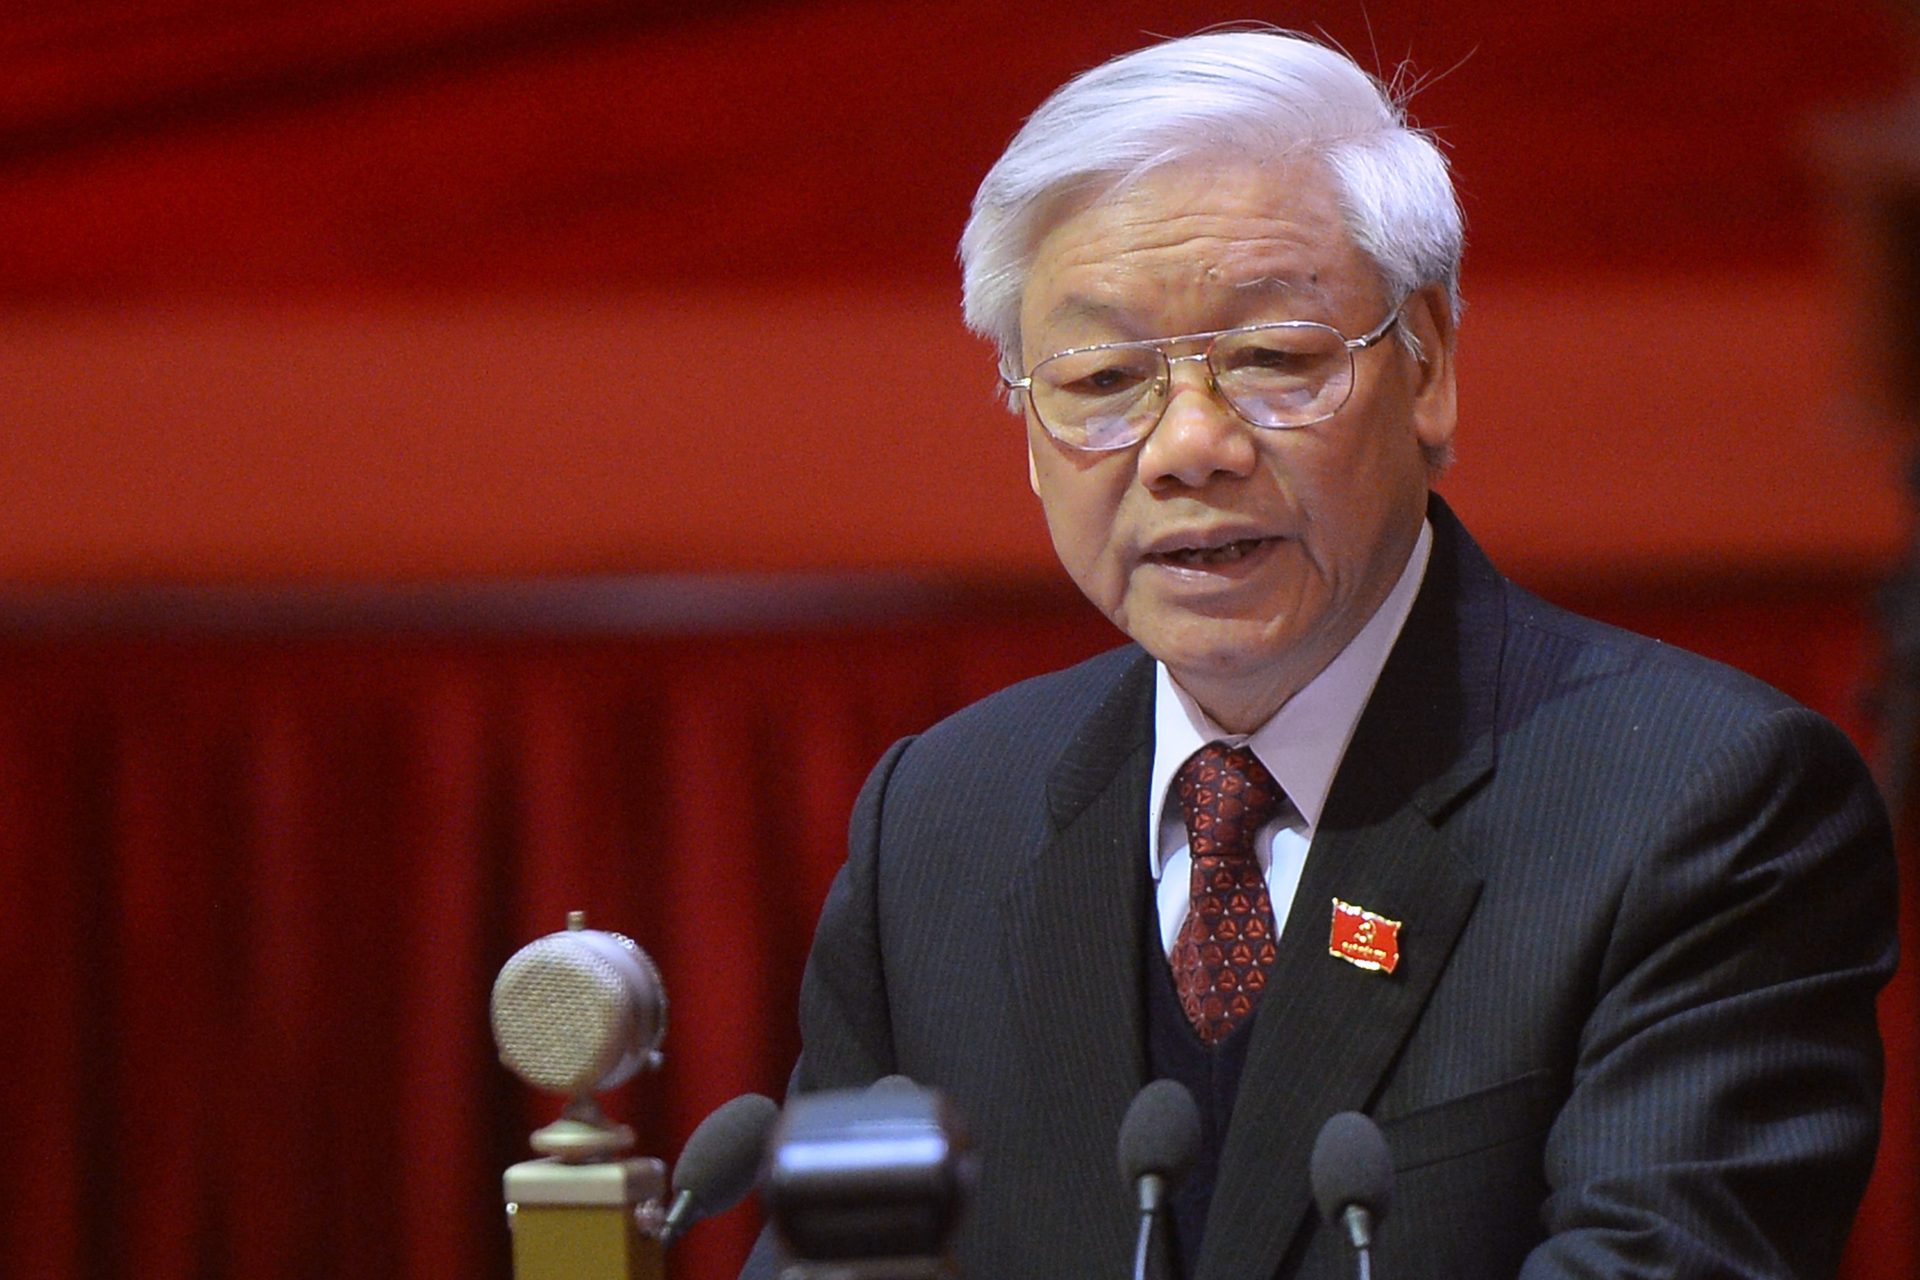 Nguyen Phu Trong's influence on Vietnam's economic and anti-corruption policy